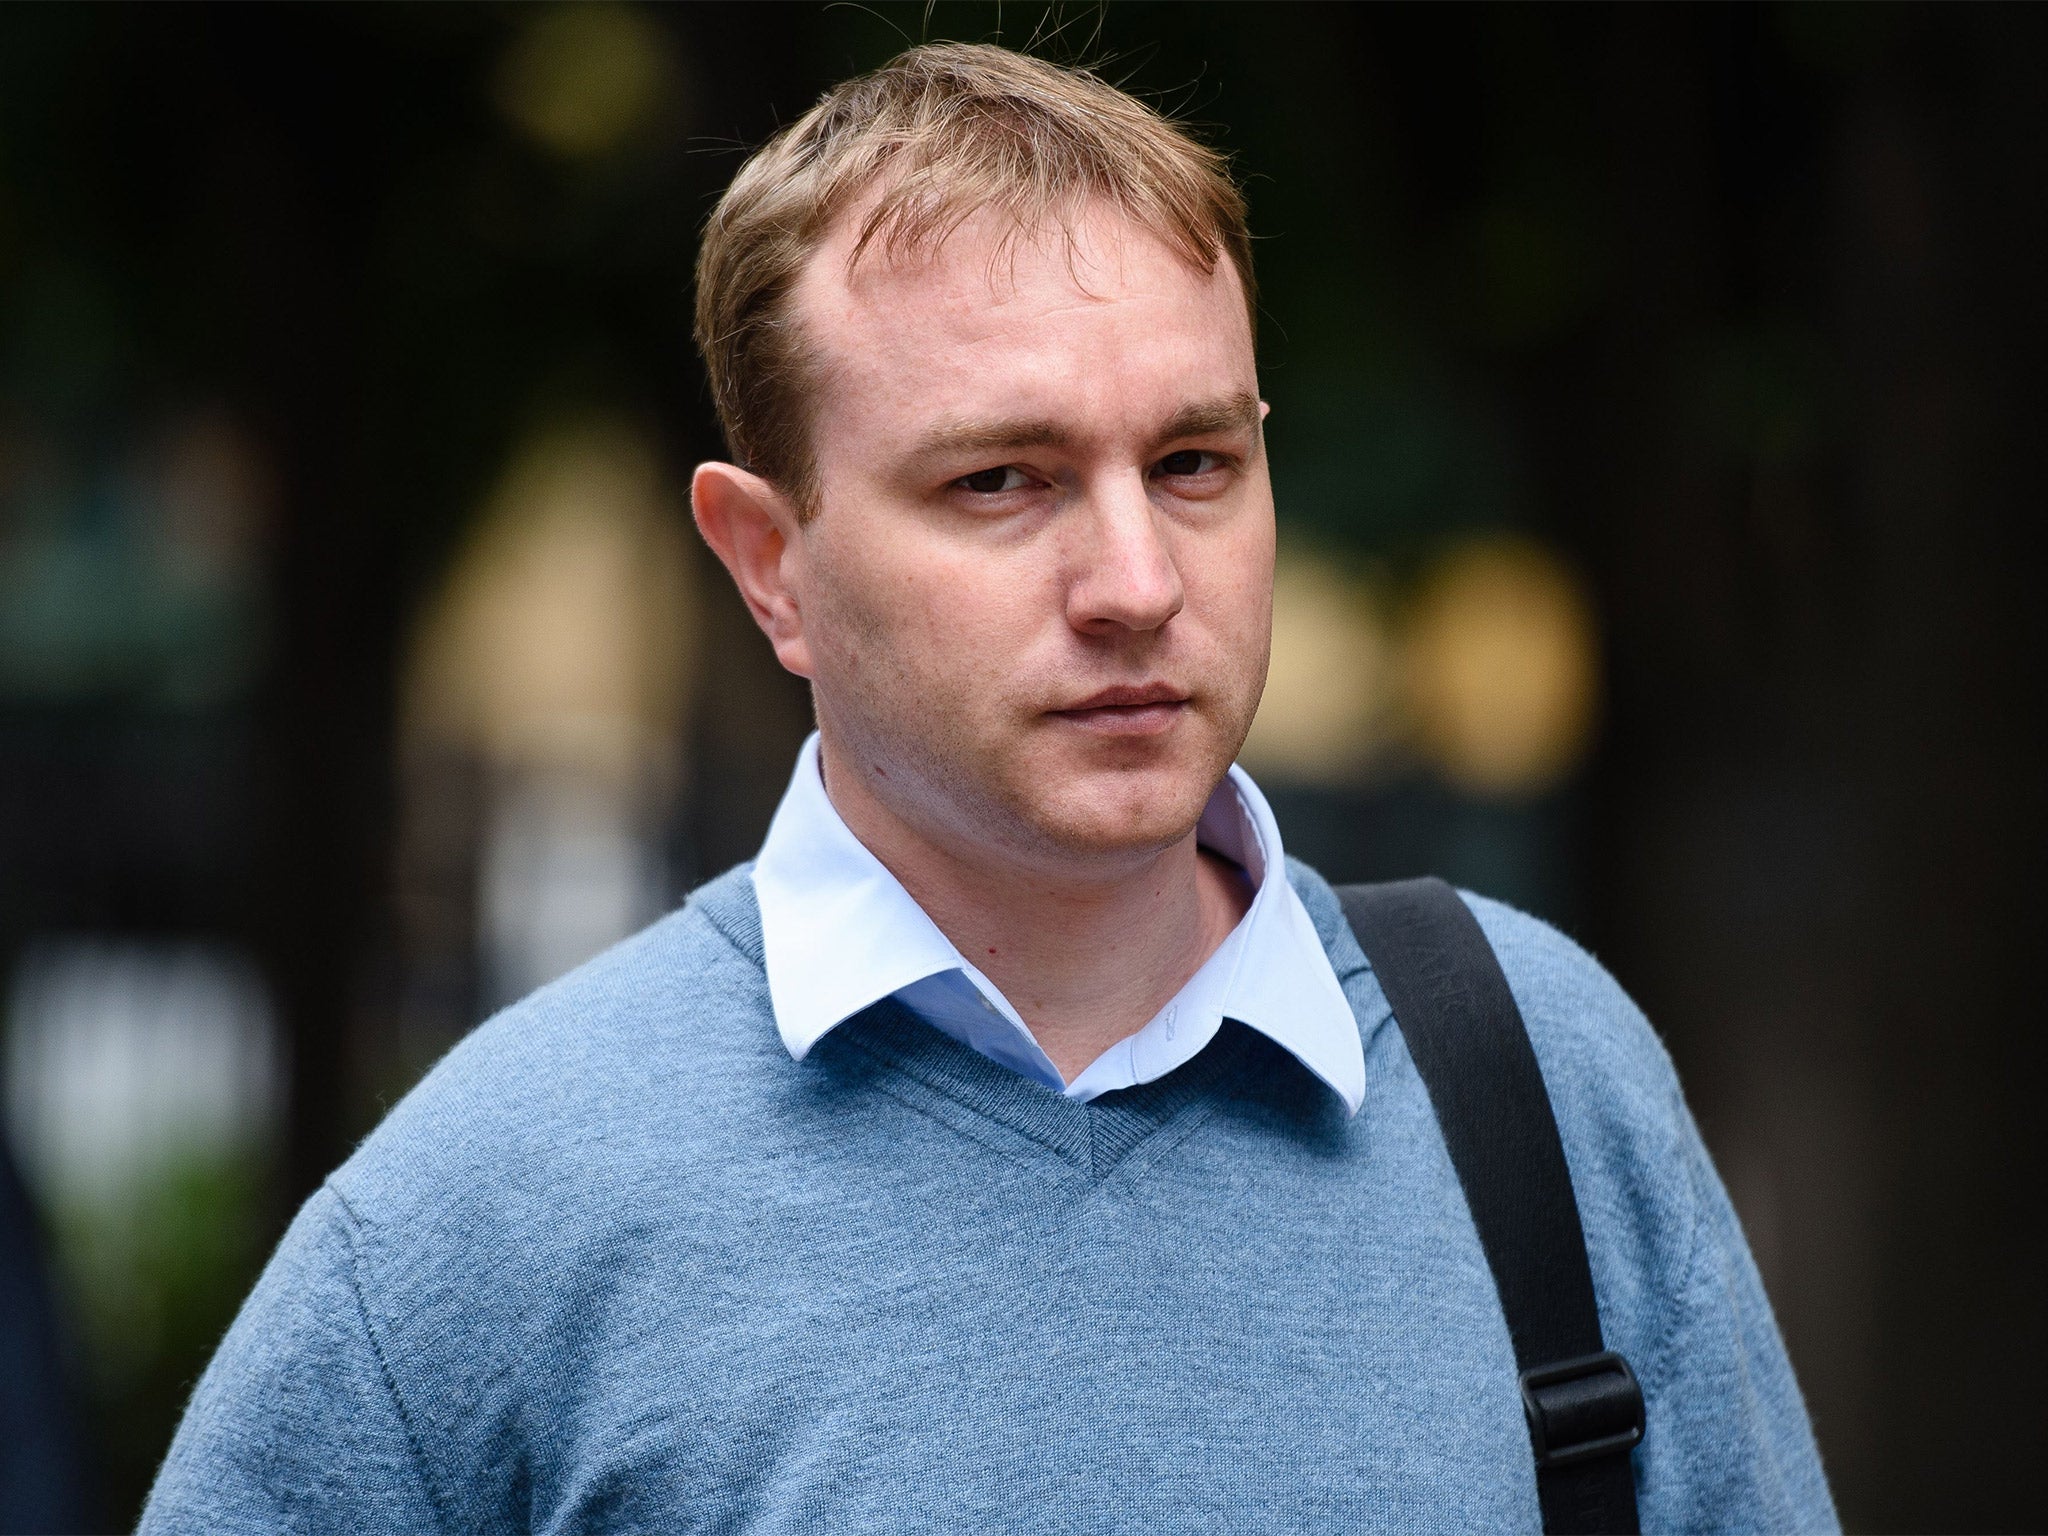 The six were key middlemen in a scheme orchestrated by convicted trader Tom Hayes. Hayes was jailed for 14 years at Southwark Crown Court in August